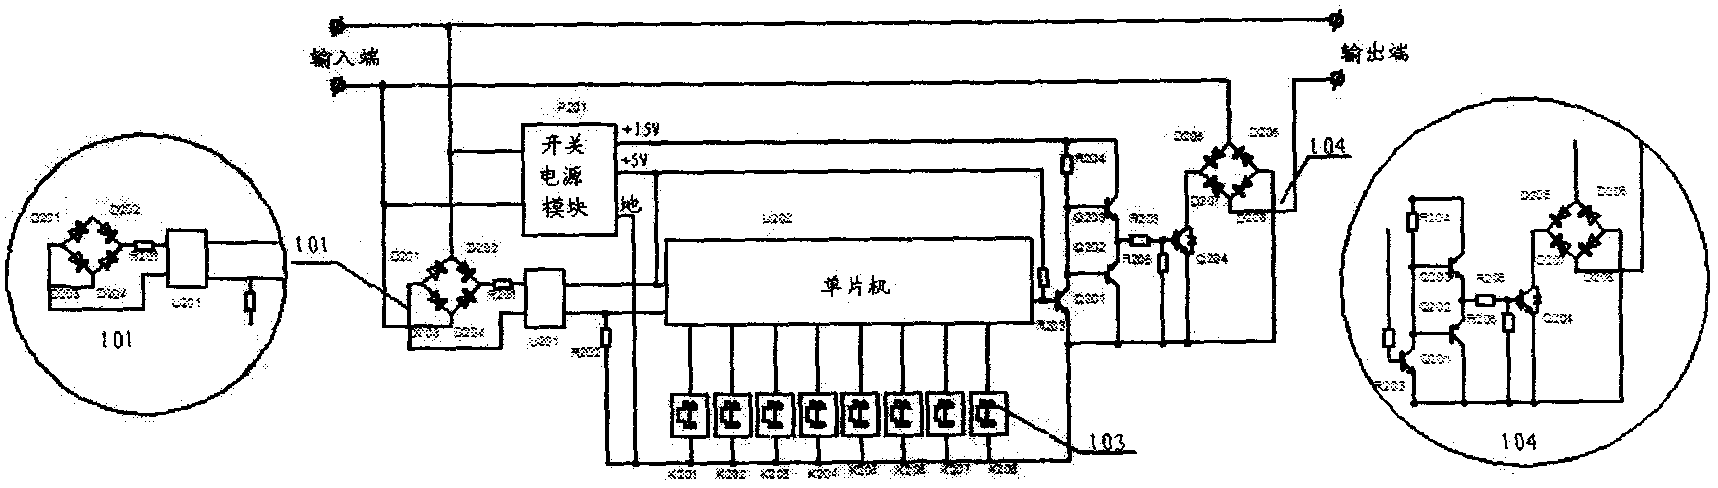 Multi-path illumination controlling apparatus using two alternating-current power lines for realizing power supplying and controlling